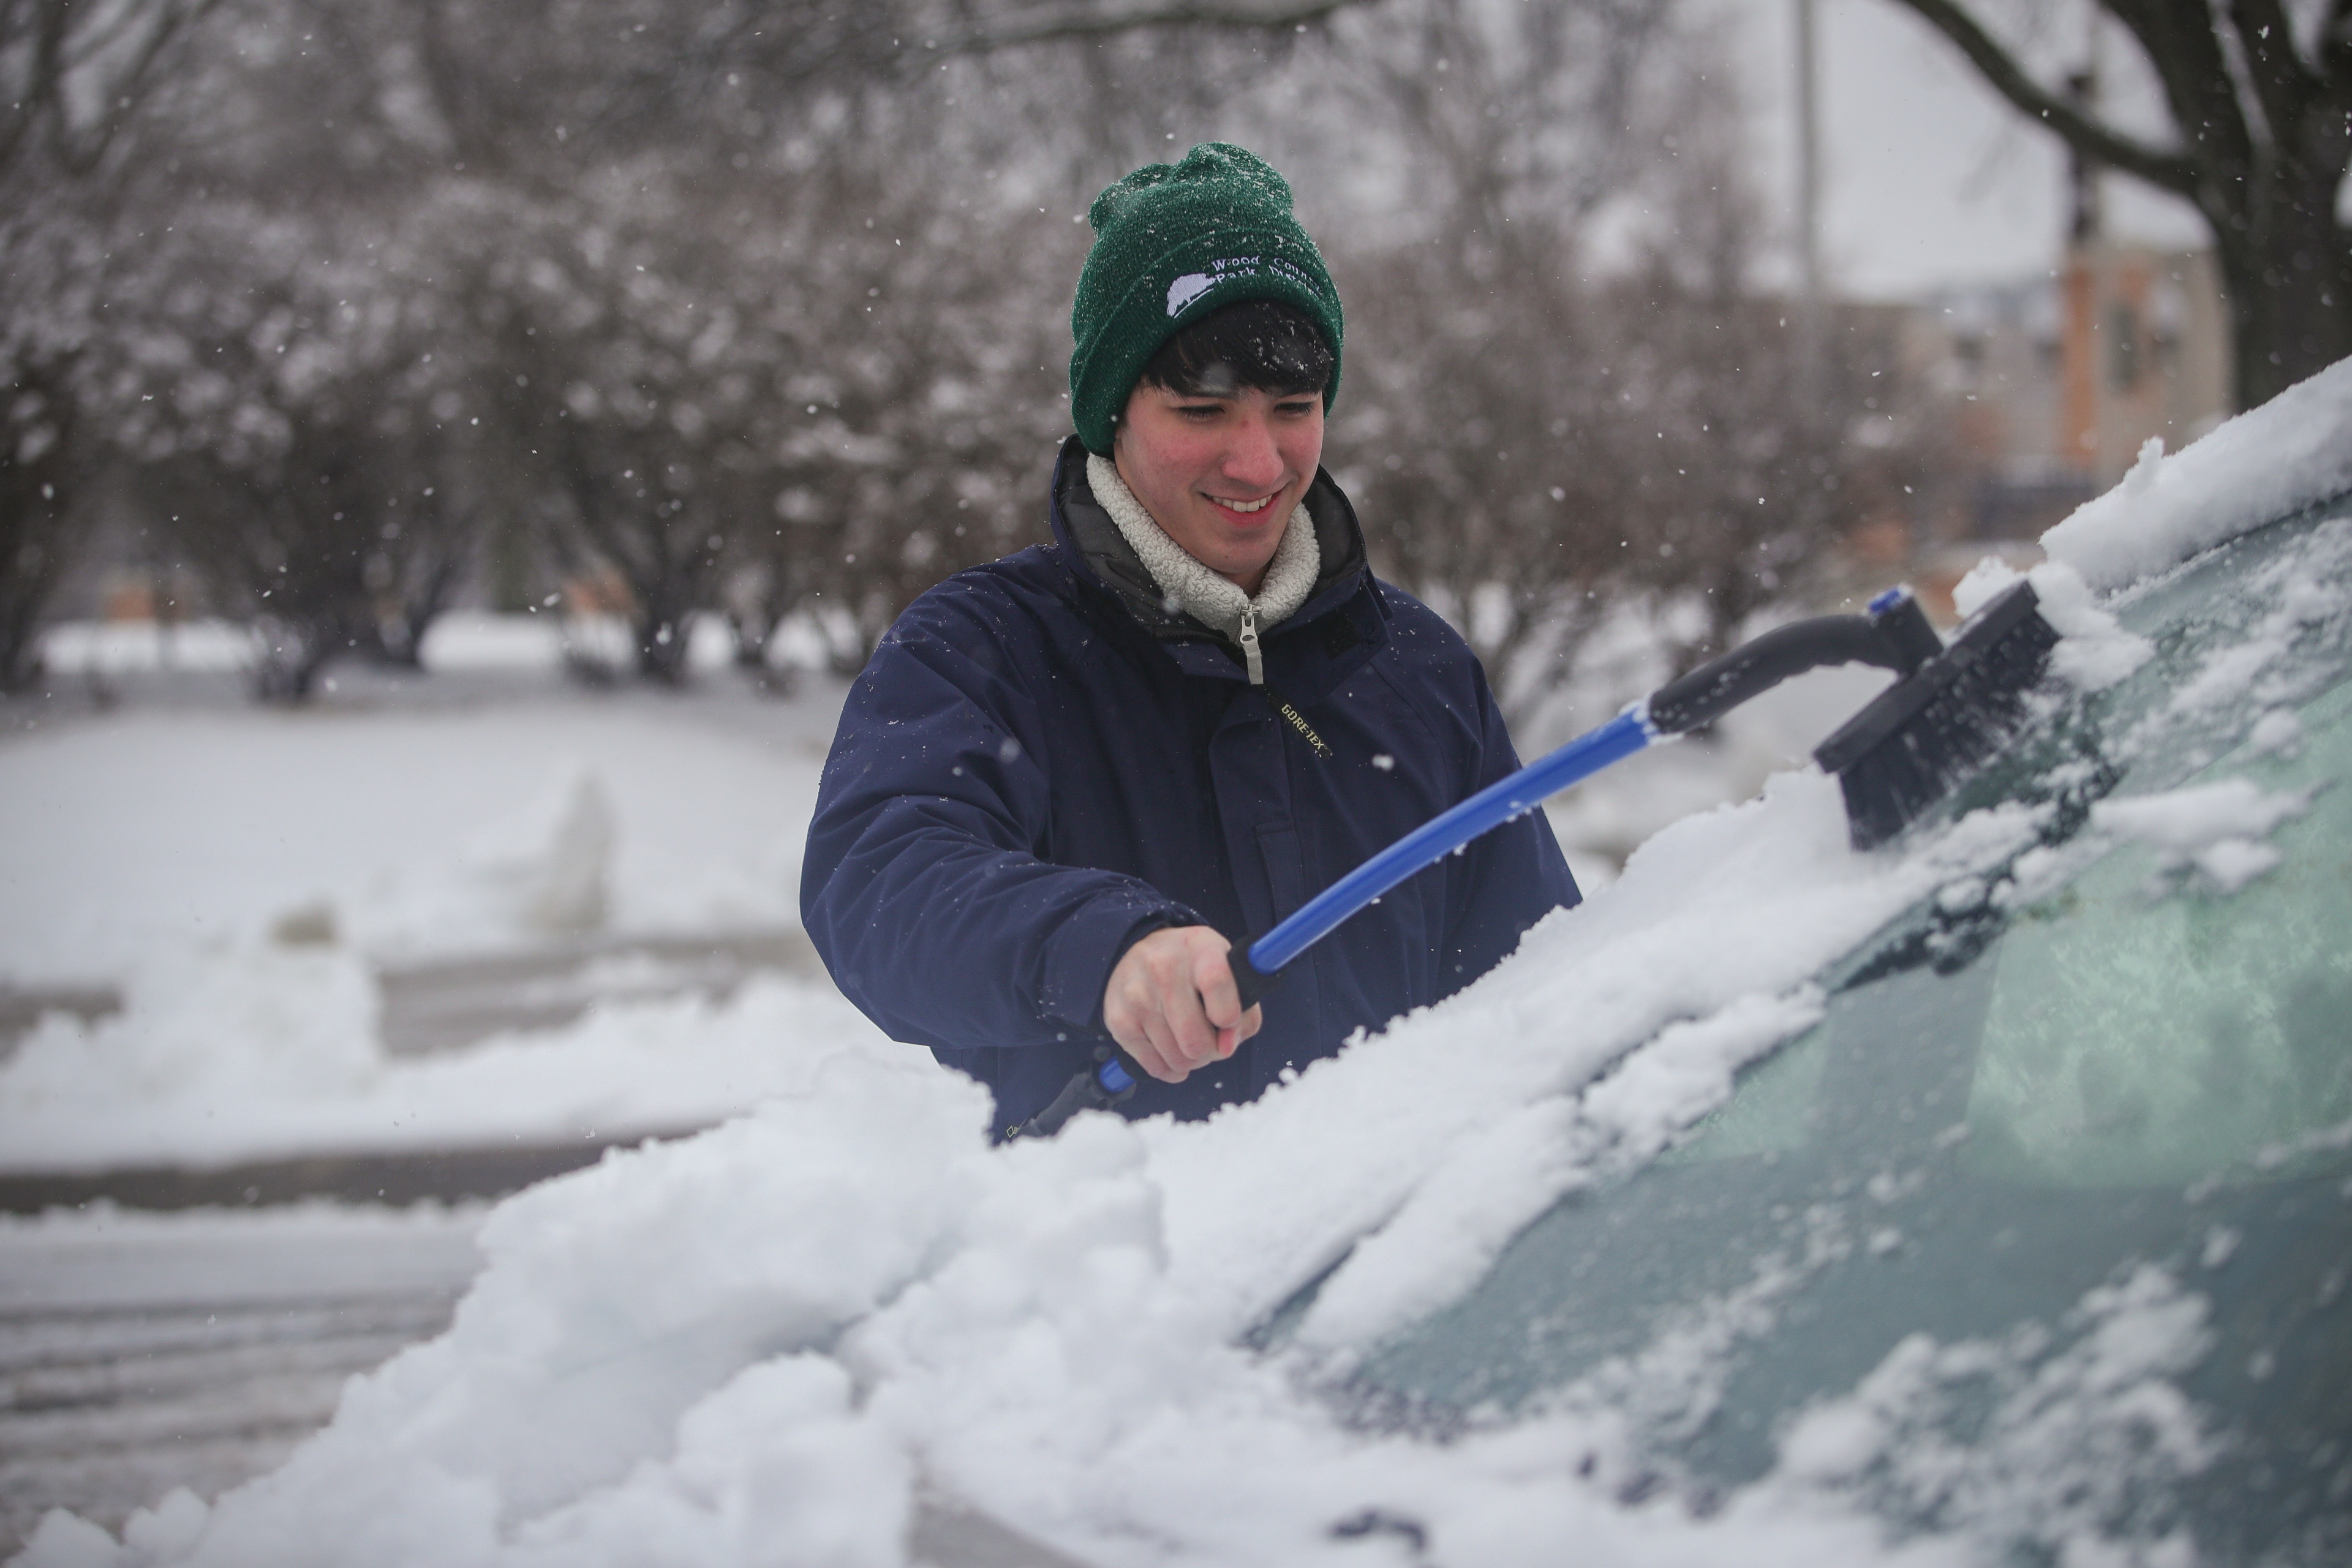 A person brushes snow off a vehicle windshield